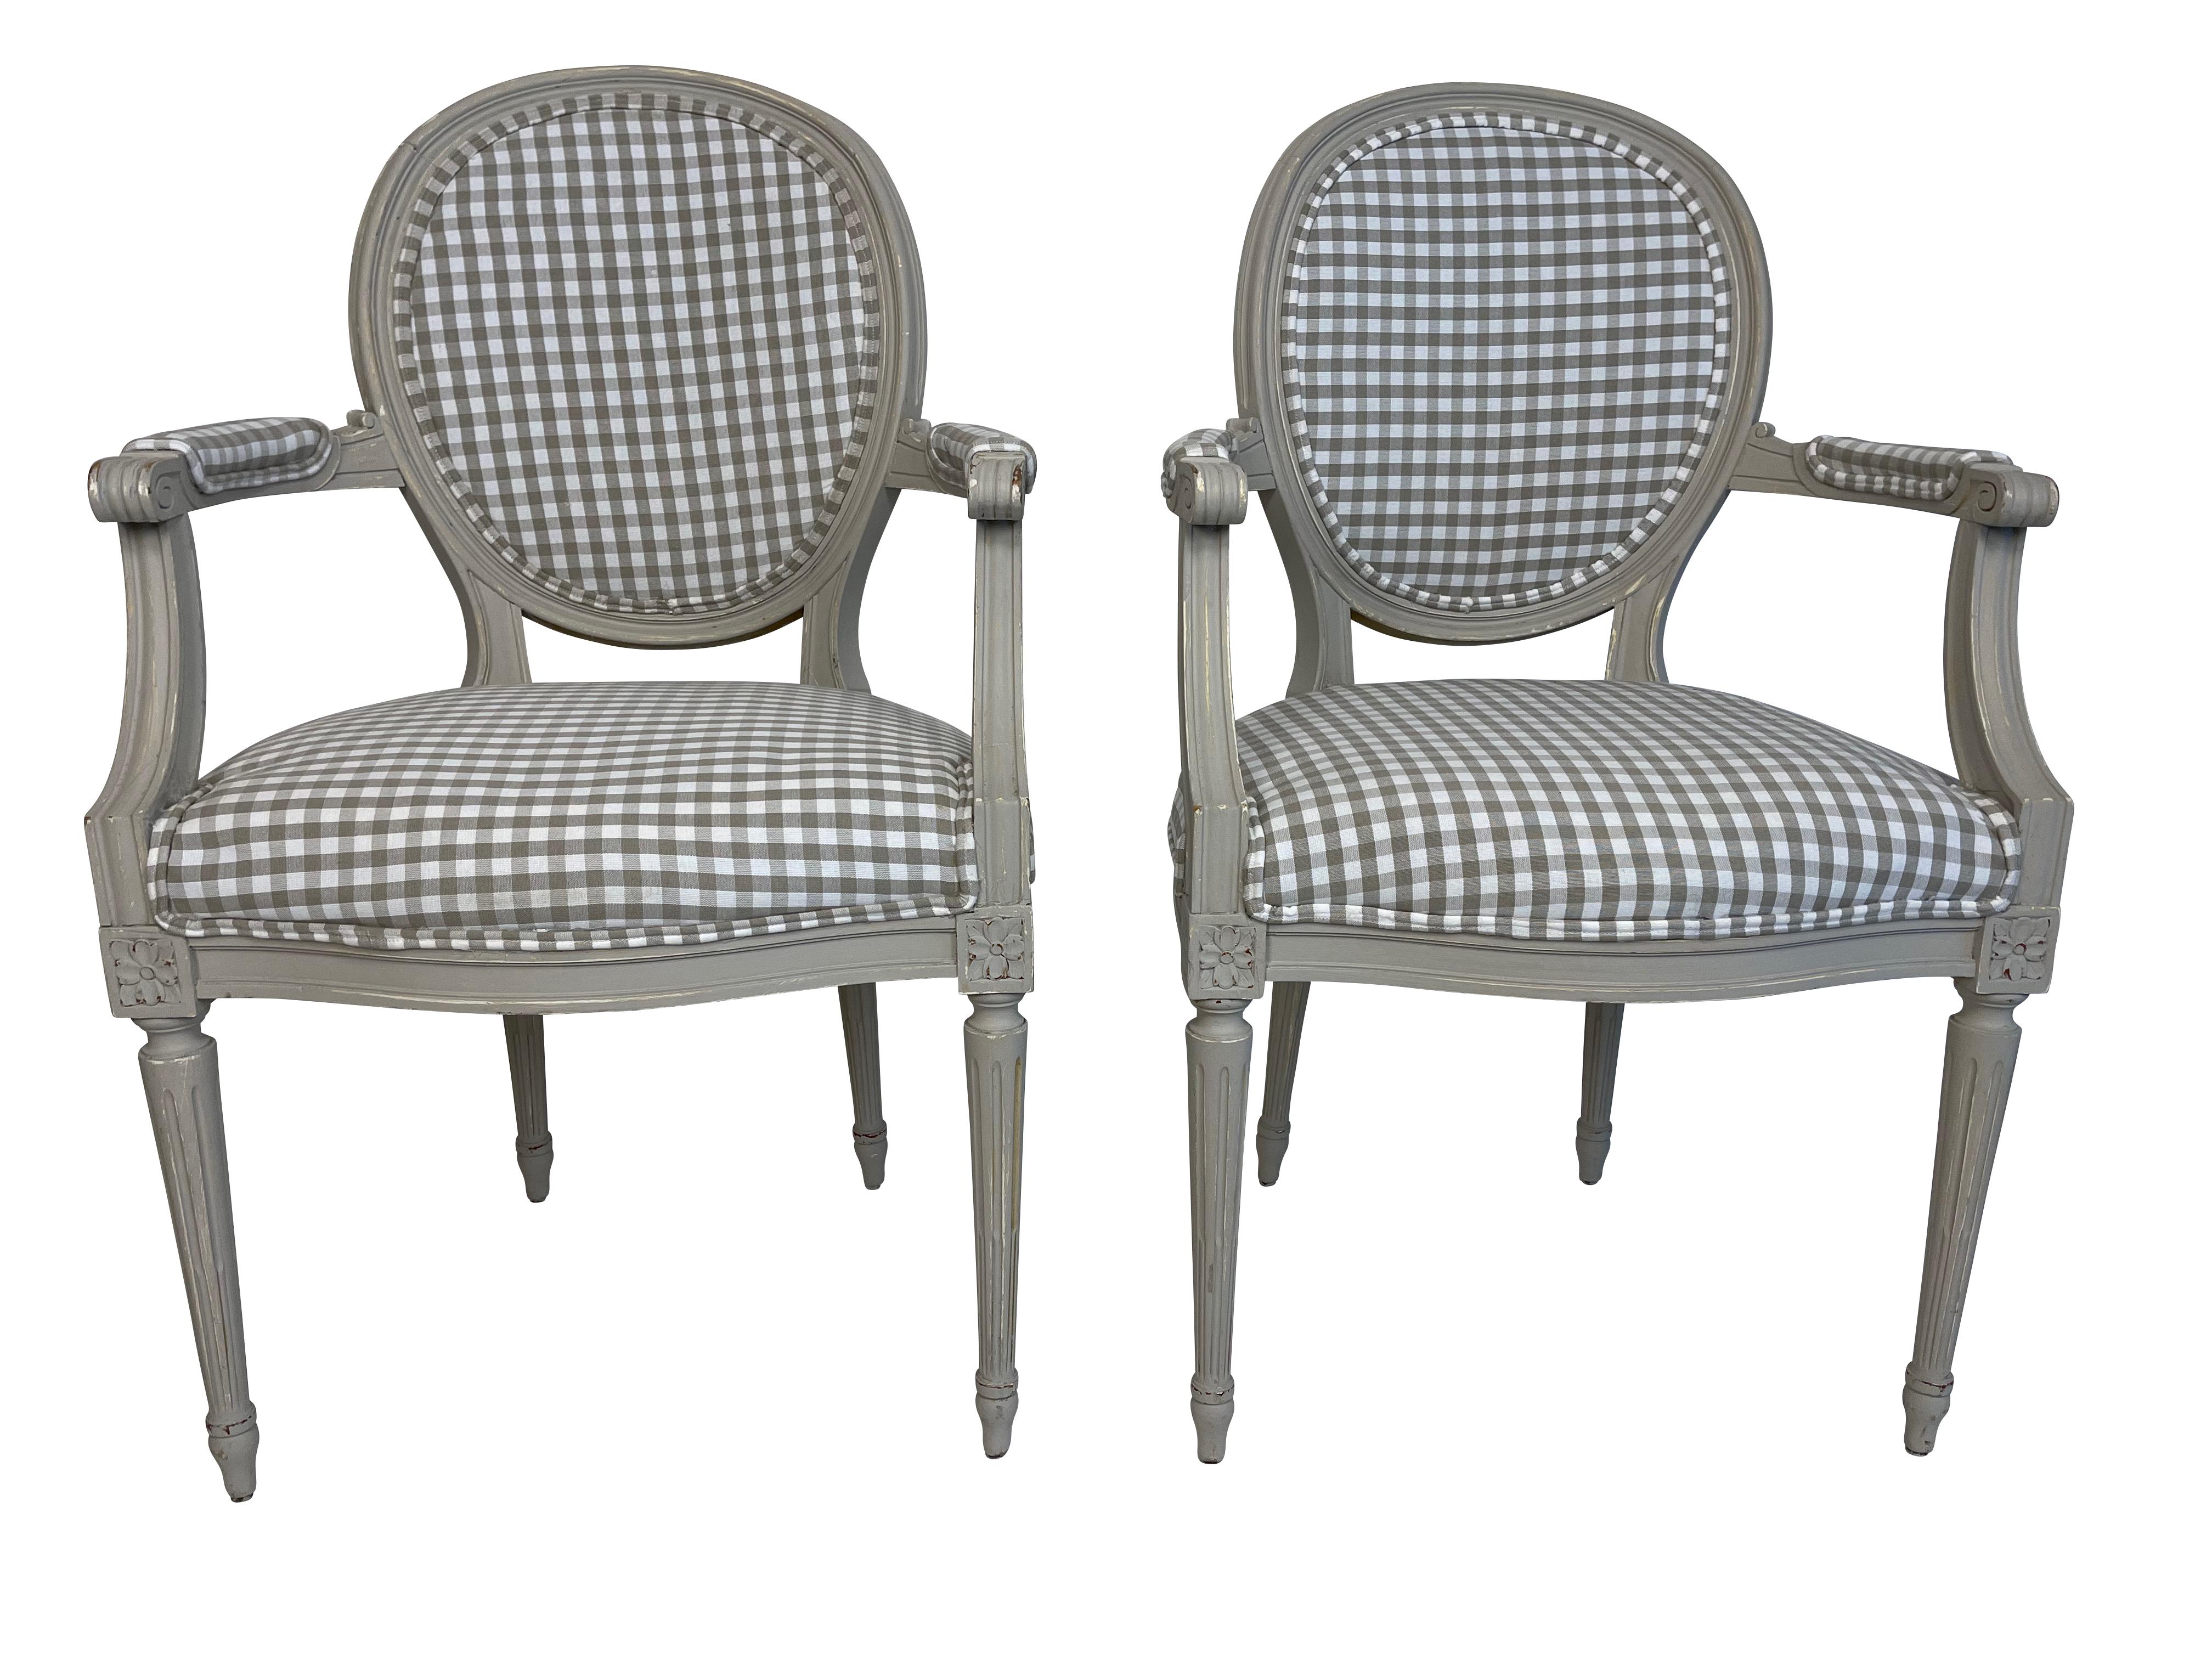 Pair of Louis XVI grey painted fauteuils/armchairs newly re-upholstered in grey gingham fabric with oval backs, padded arms, reeded tapered legs with rosette decoration. Newly painted.